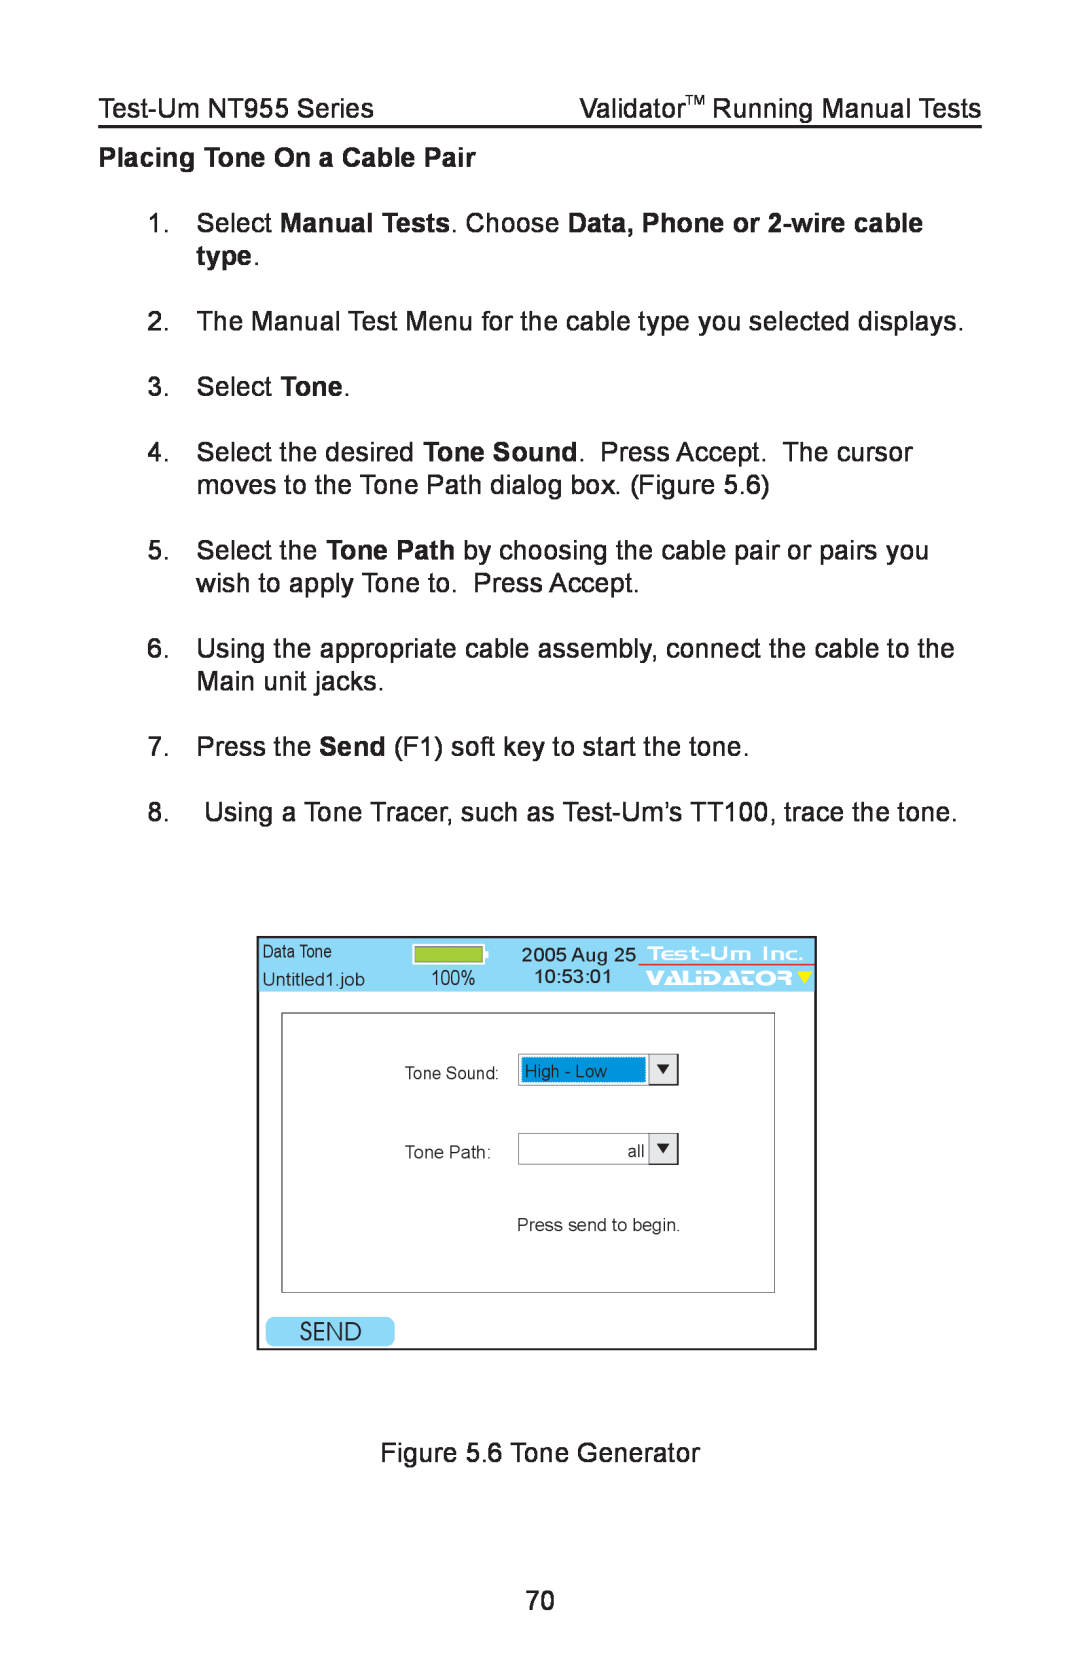 Test-Um NT955 Placing Tone On a Cable Pair, Select Manual Tests. Choose Data, Phone or 2-wire cable type, Send 